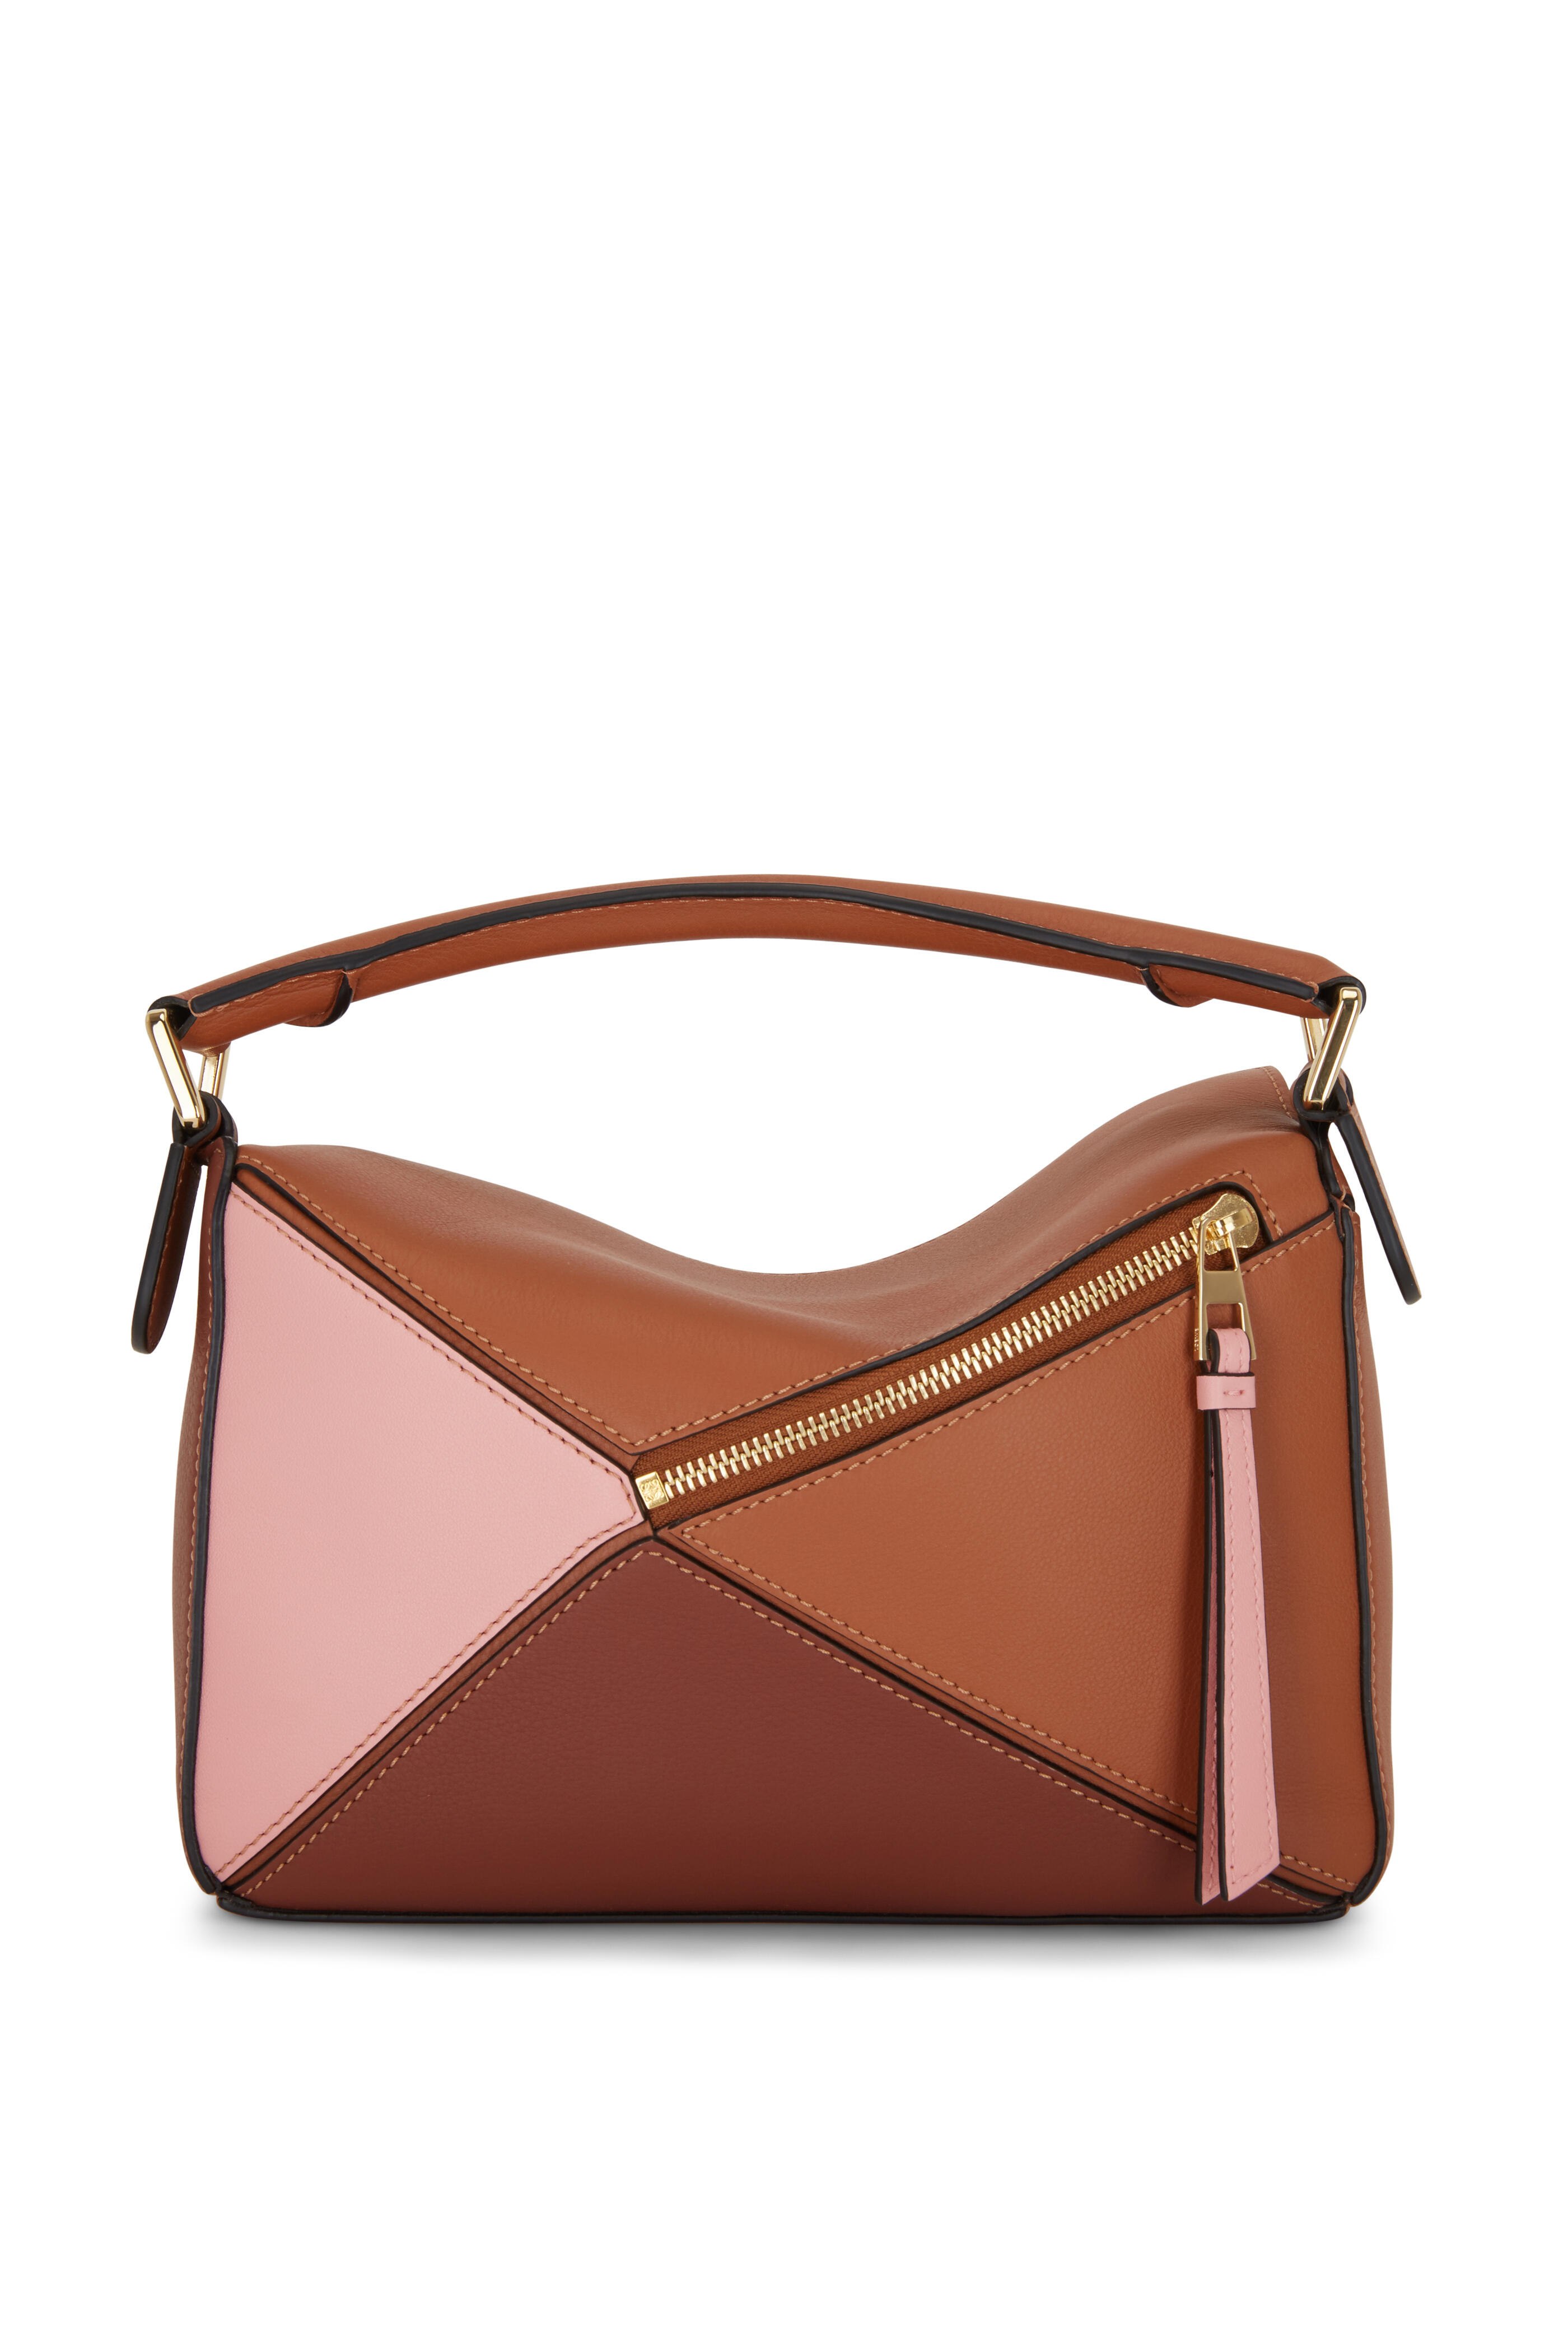 Loewe - Puzzle Small Leather Shoulder Bag - Tan for Women